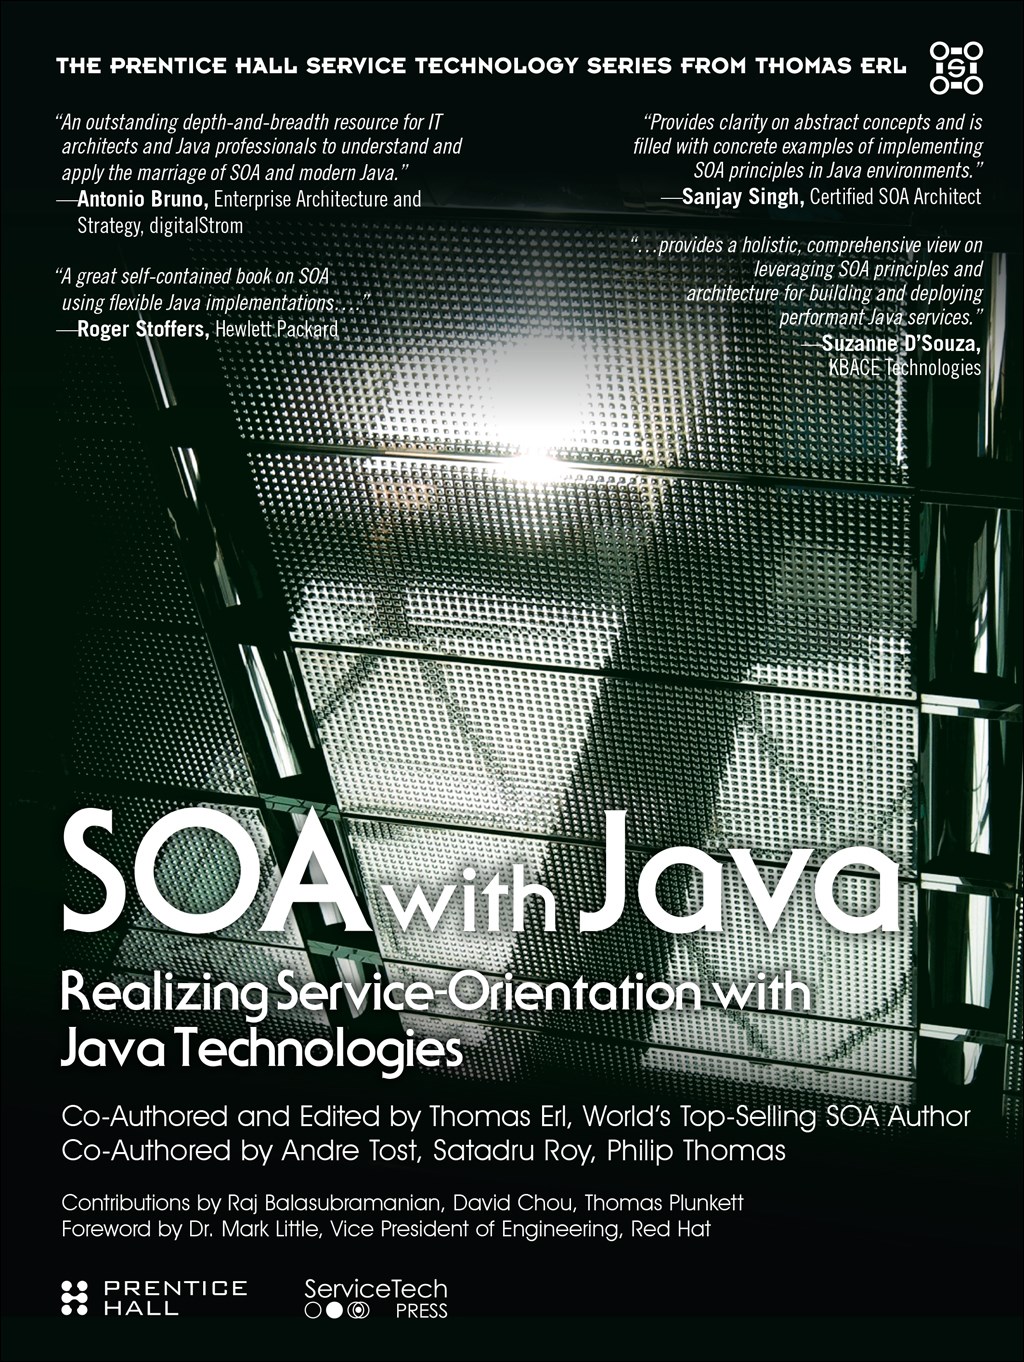 SOA with Java (paperback): Realizing ServiceOrientation with Java Technologies